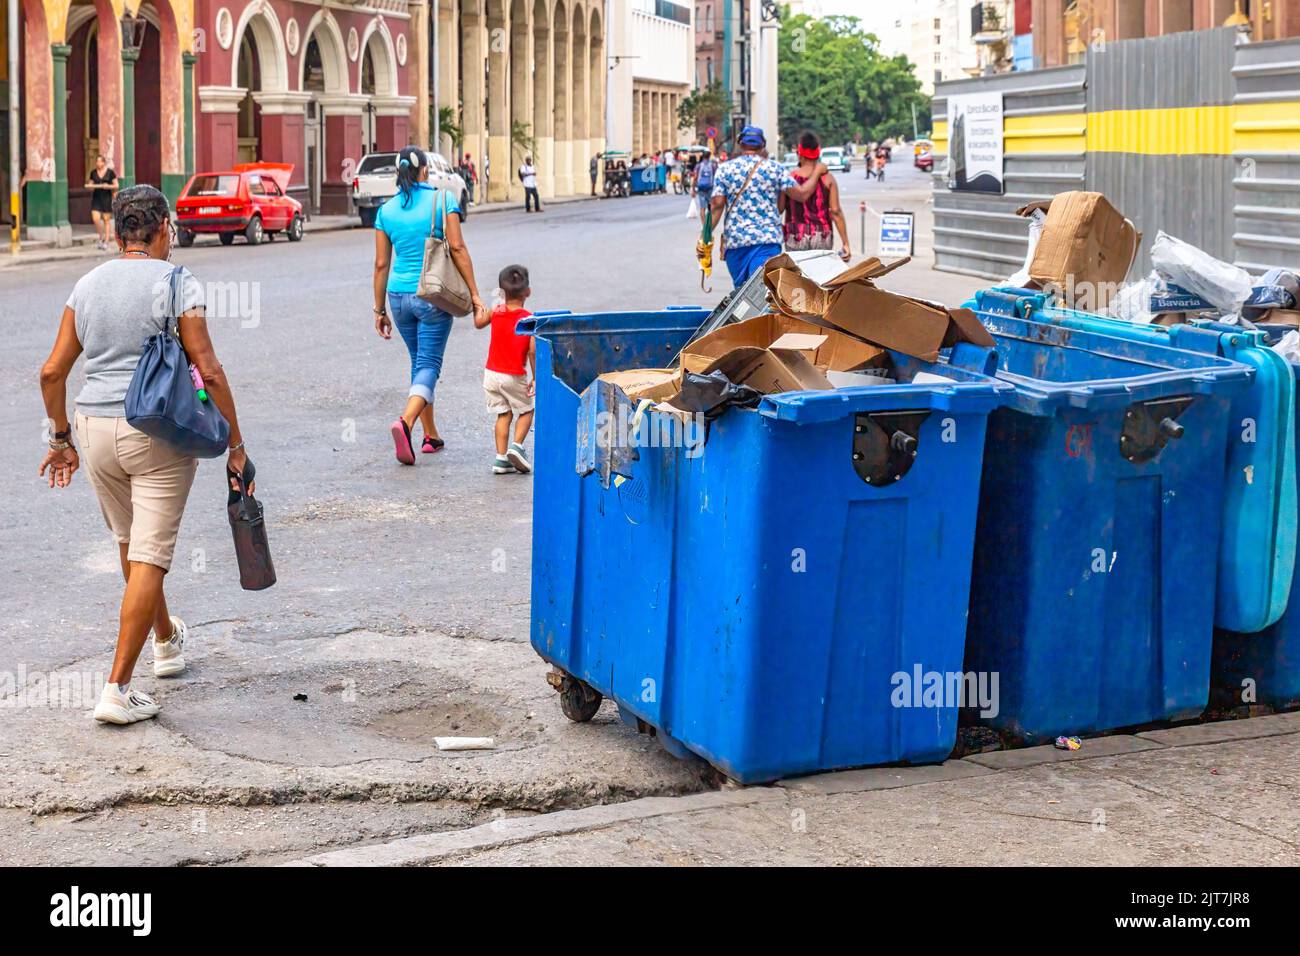 Cuban people walking by large garbage bins in a city street. The waste is uncovered and overflowing. Stock Photo